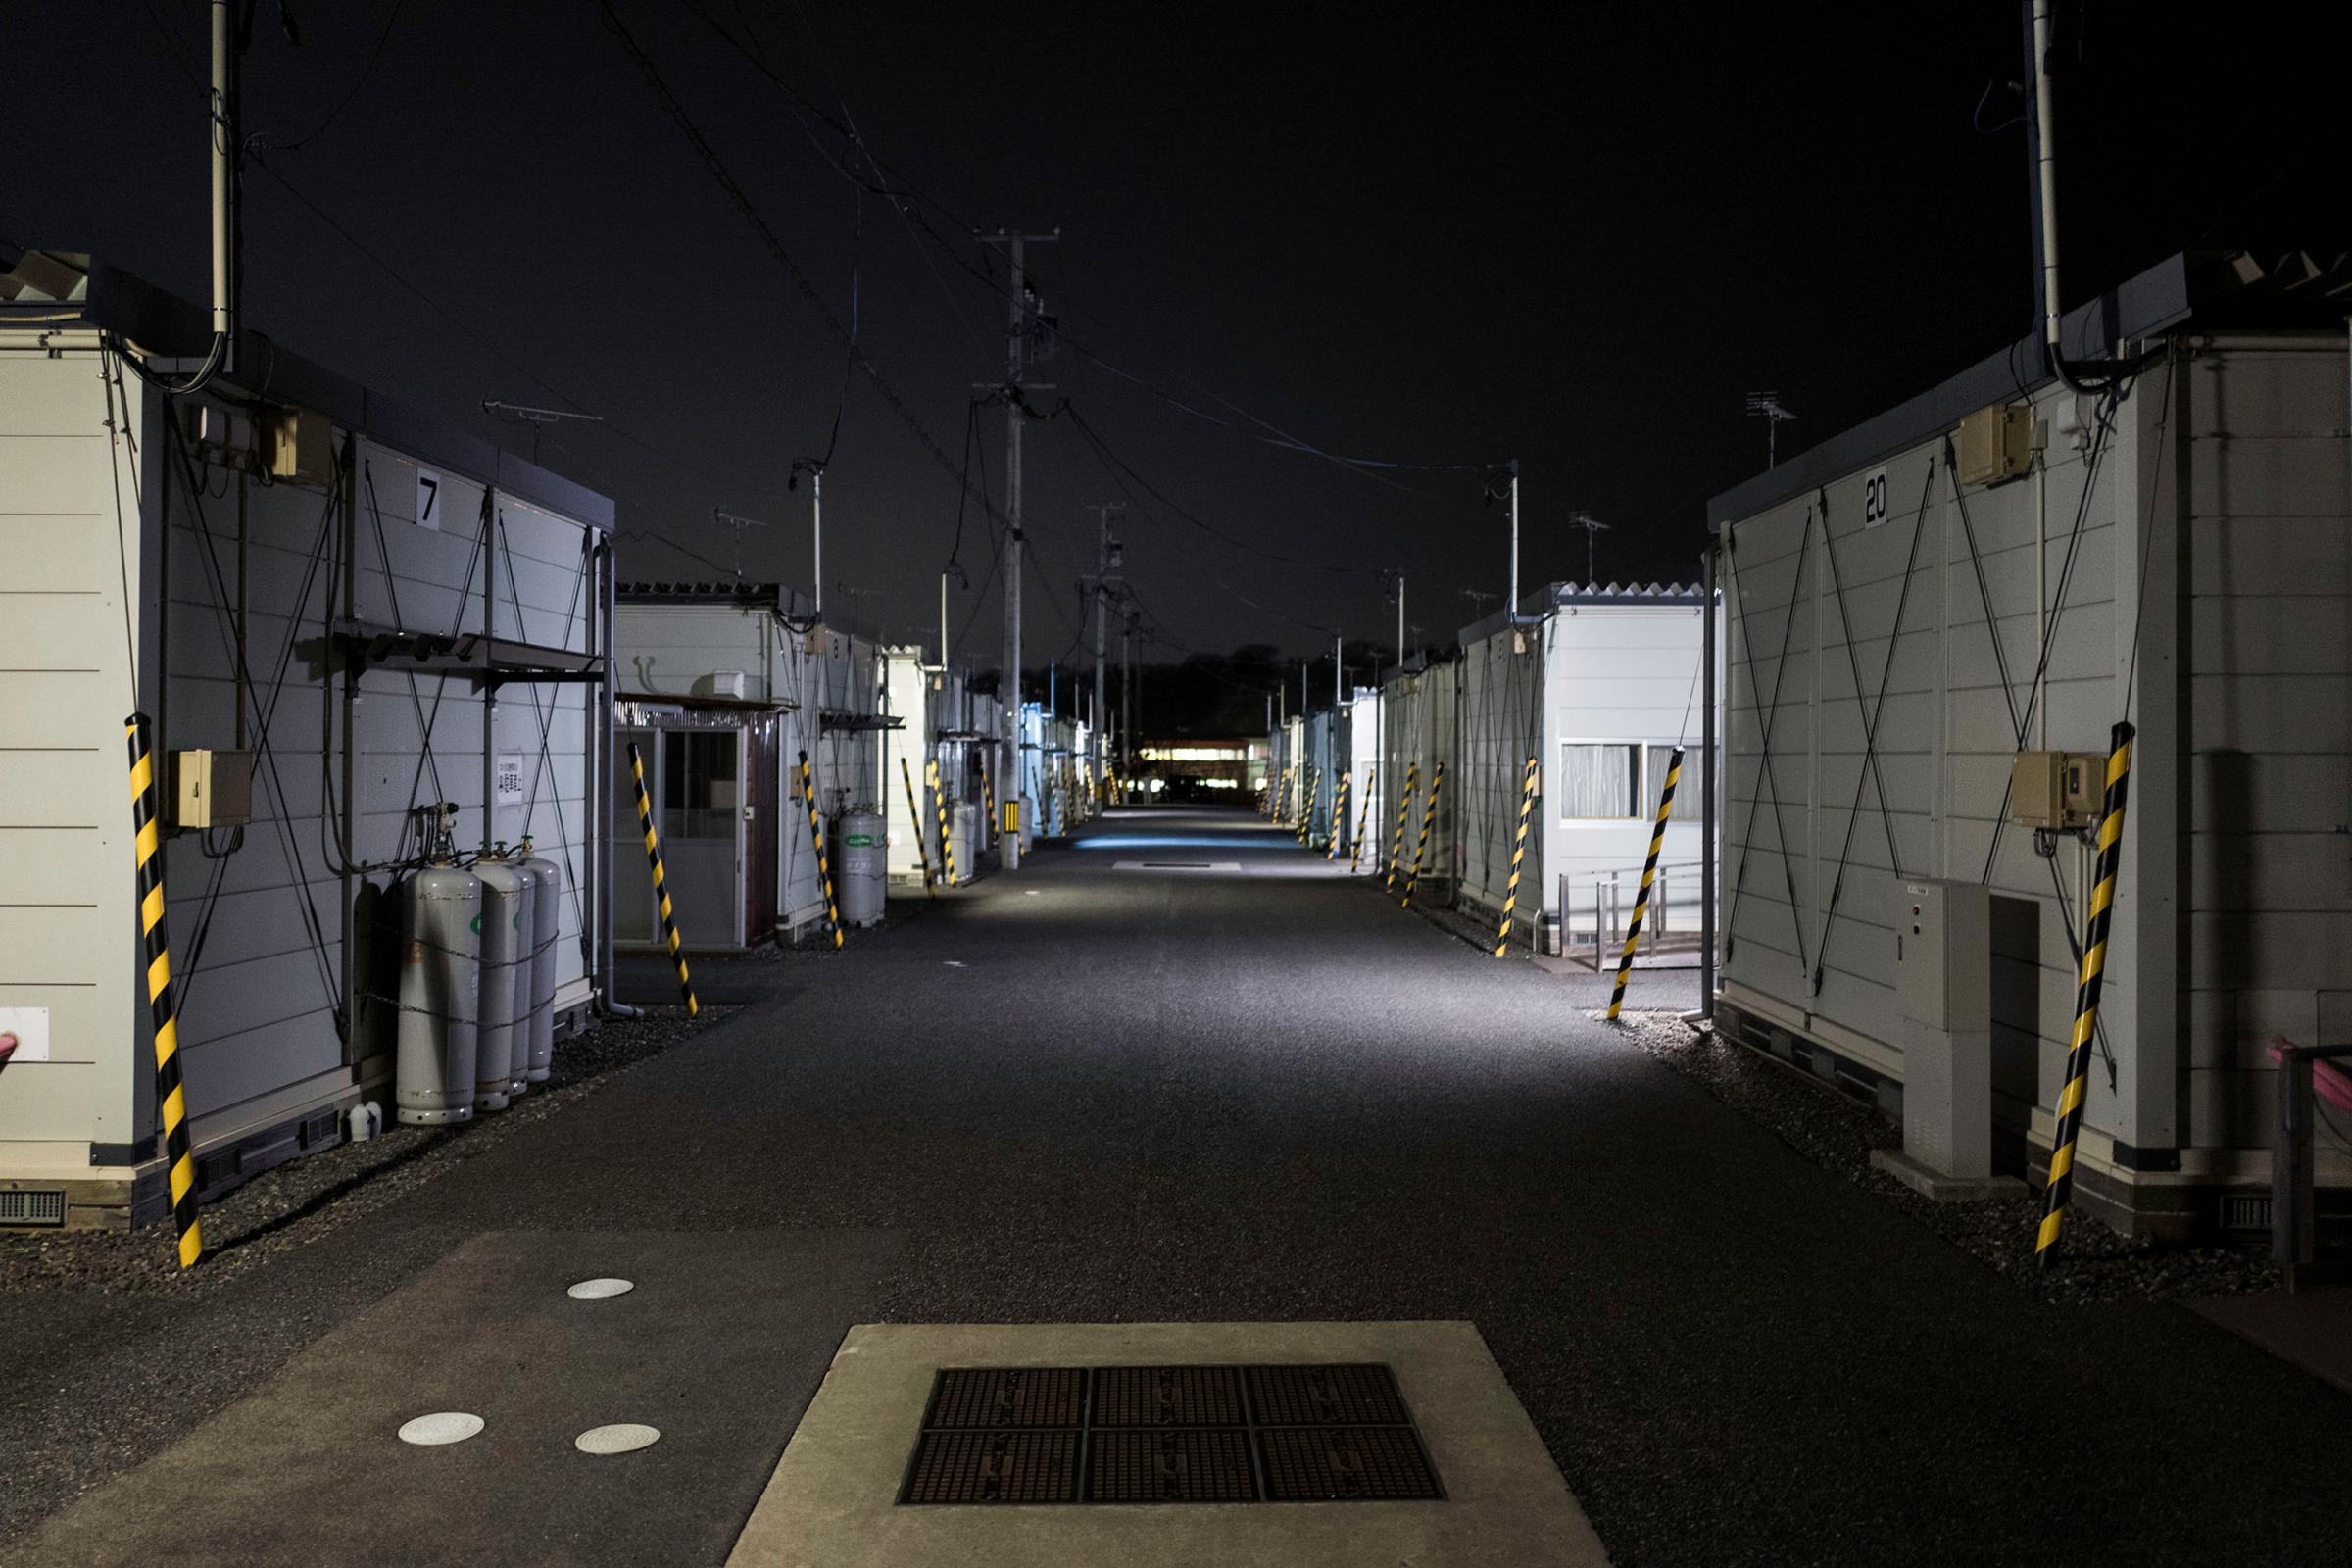 Temporary housing units are seen at night, March 4, 2016.